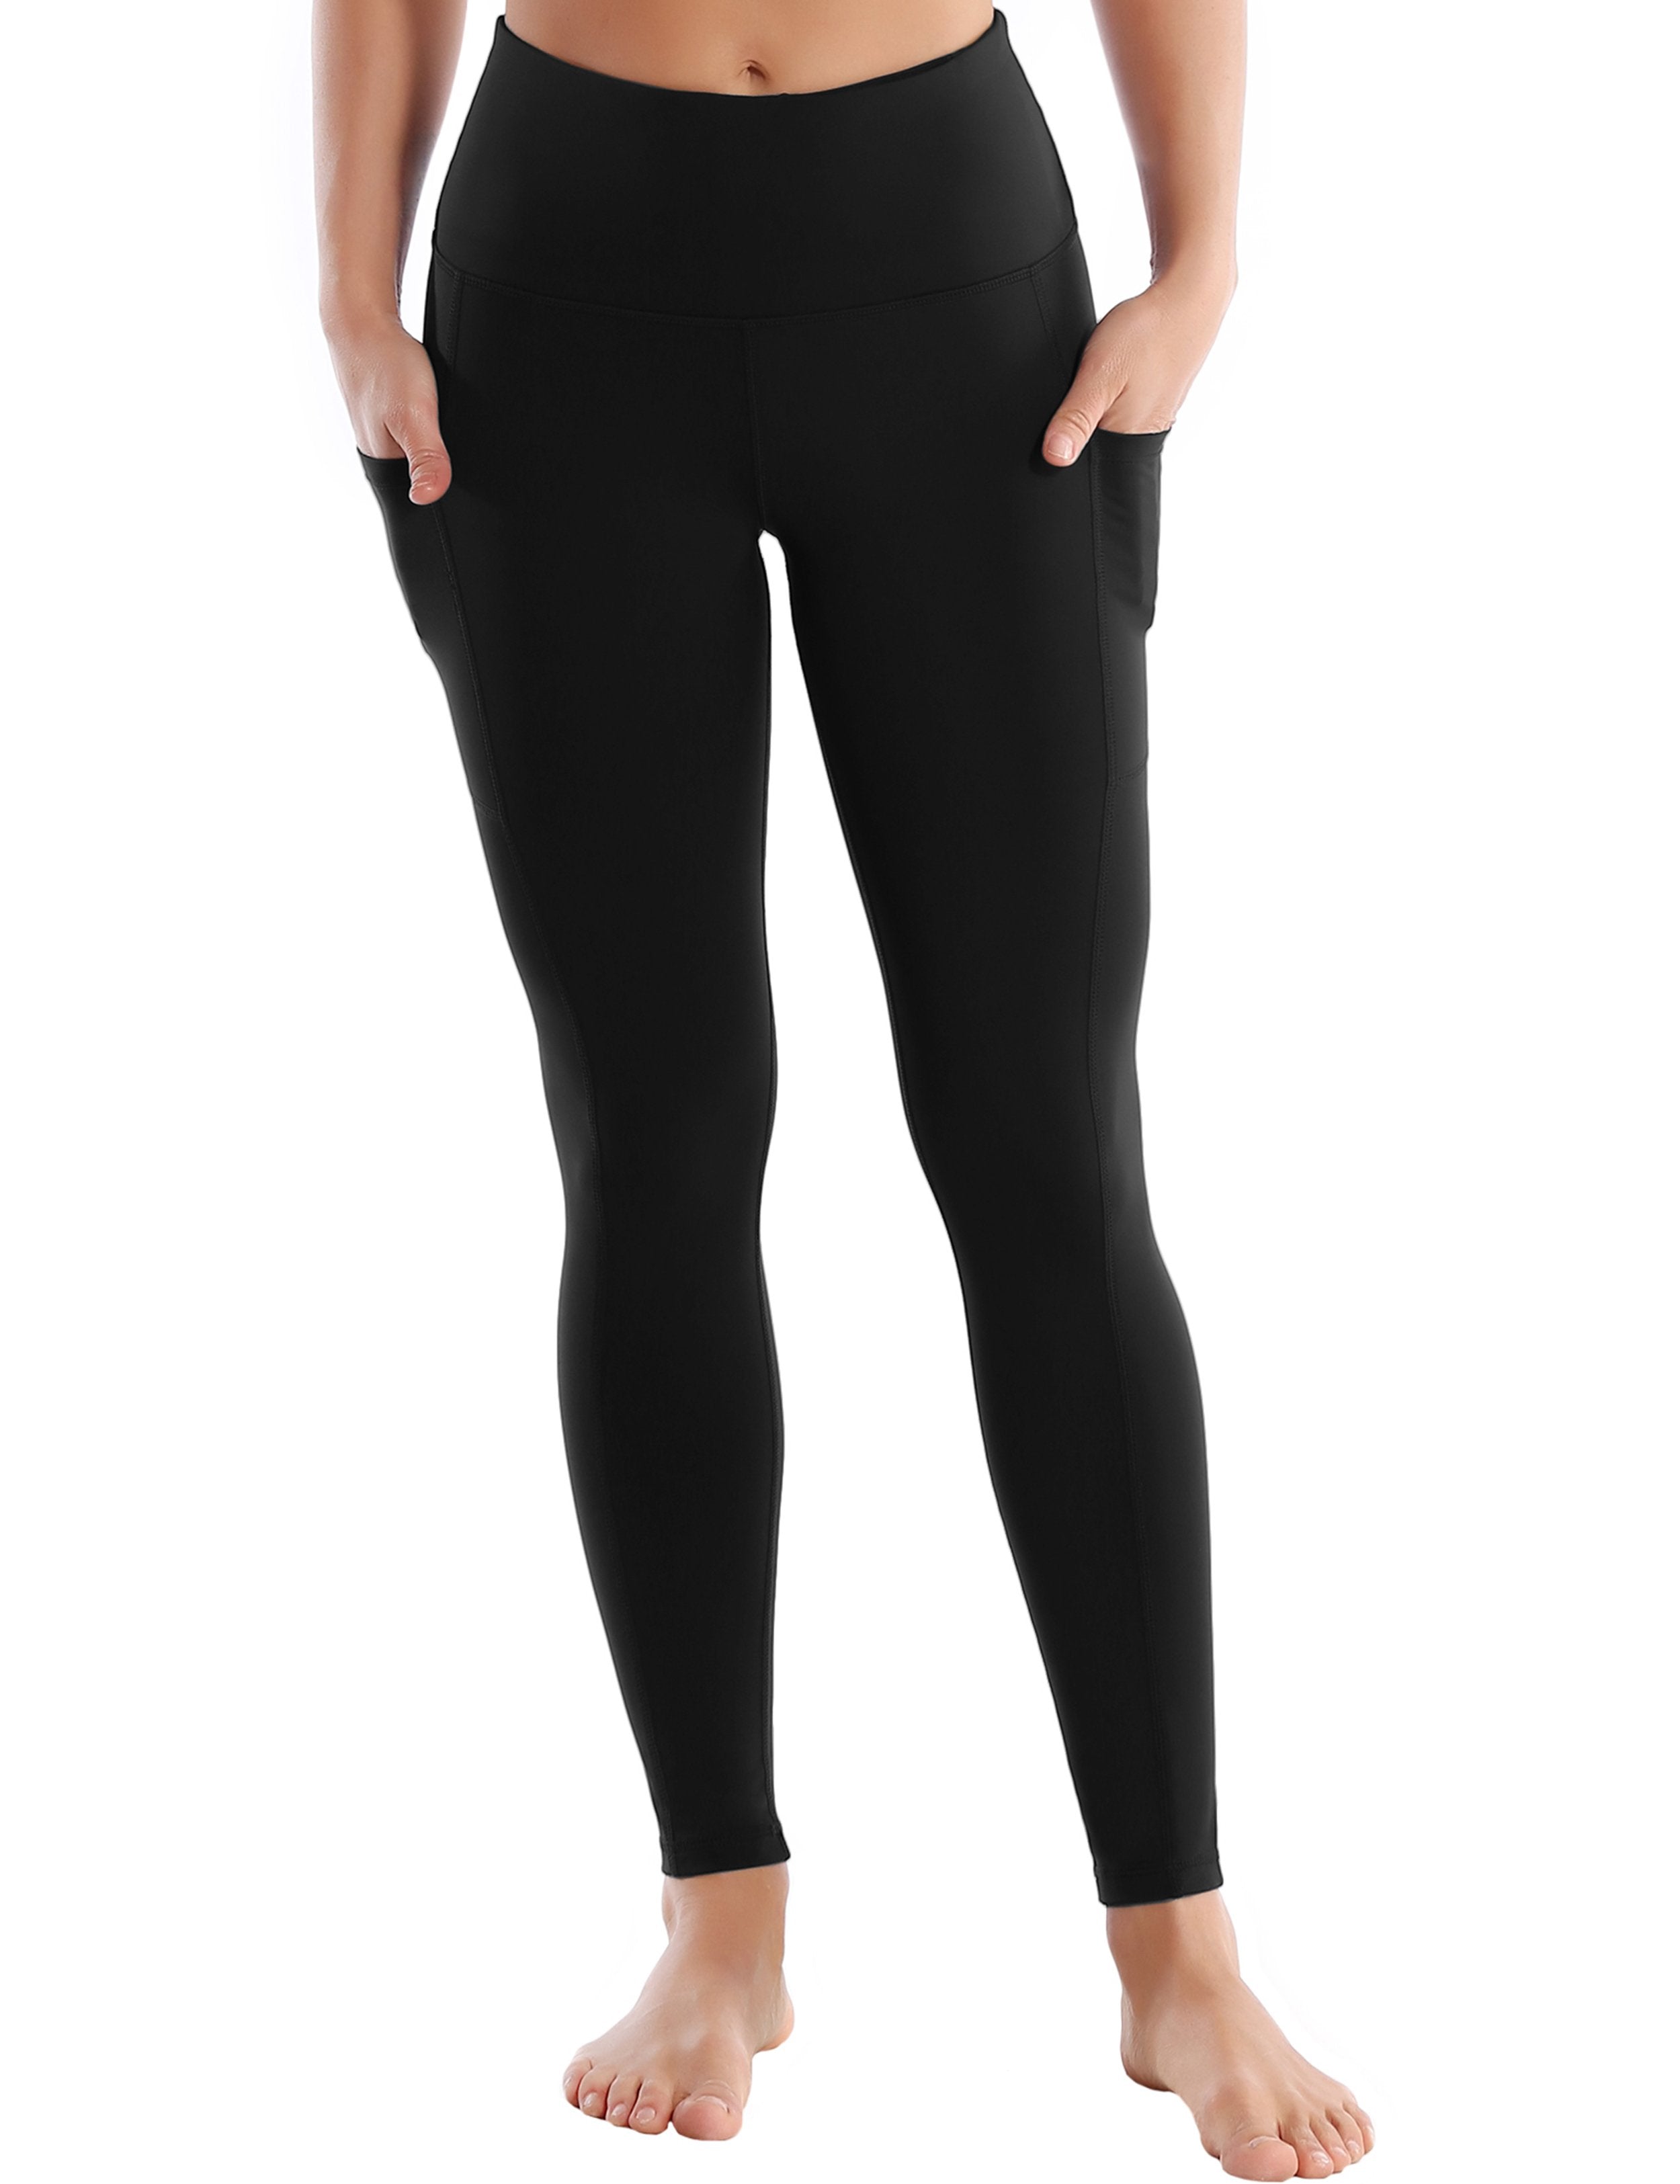 Hip Line Side Pockets Running Pants black Sexy Hip Line Side Pockets 75%Nylon/25%Spandex Fabric doesn't attract lint easily 4-way stretch No see-through Moisture-wicking Tummy control Inner pocket Two lengths